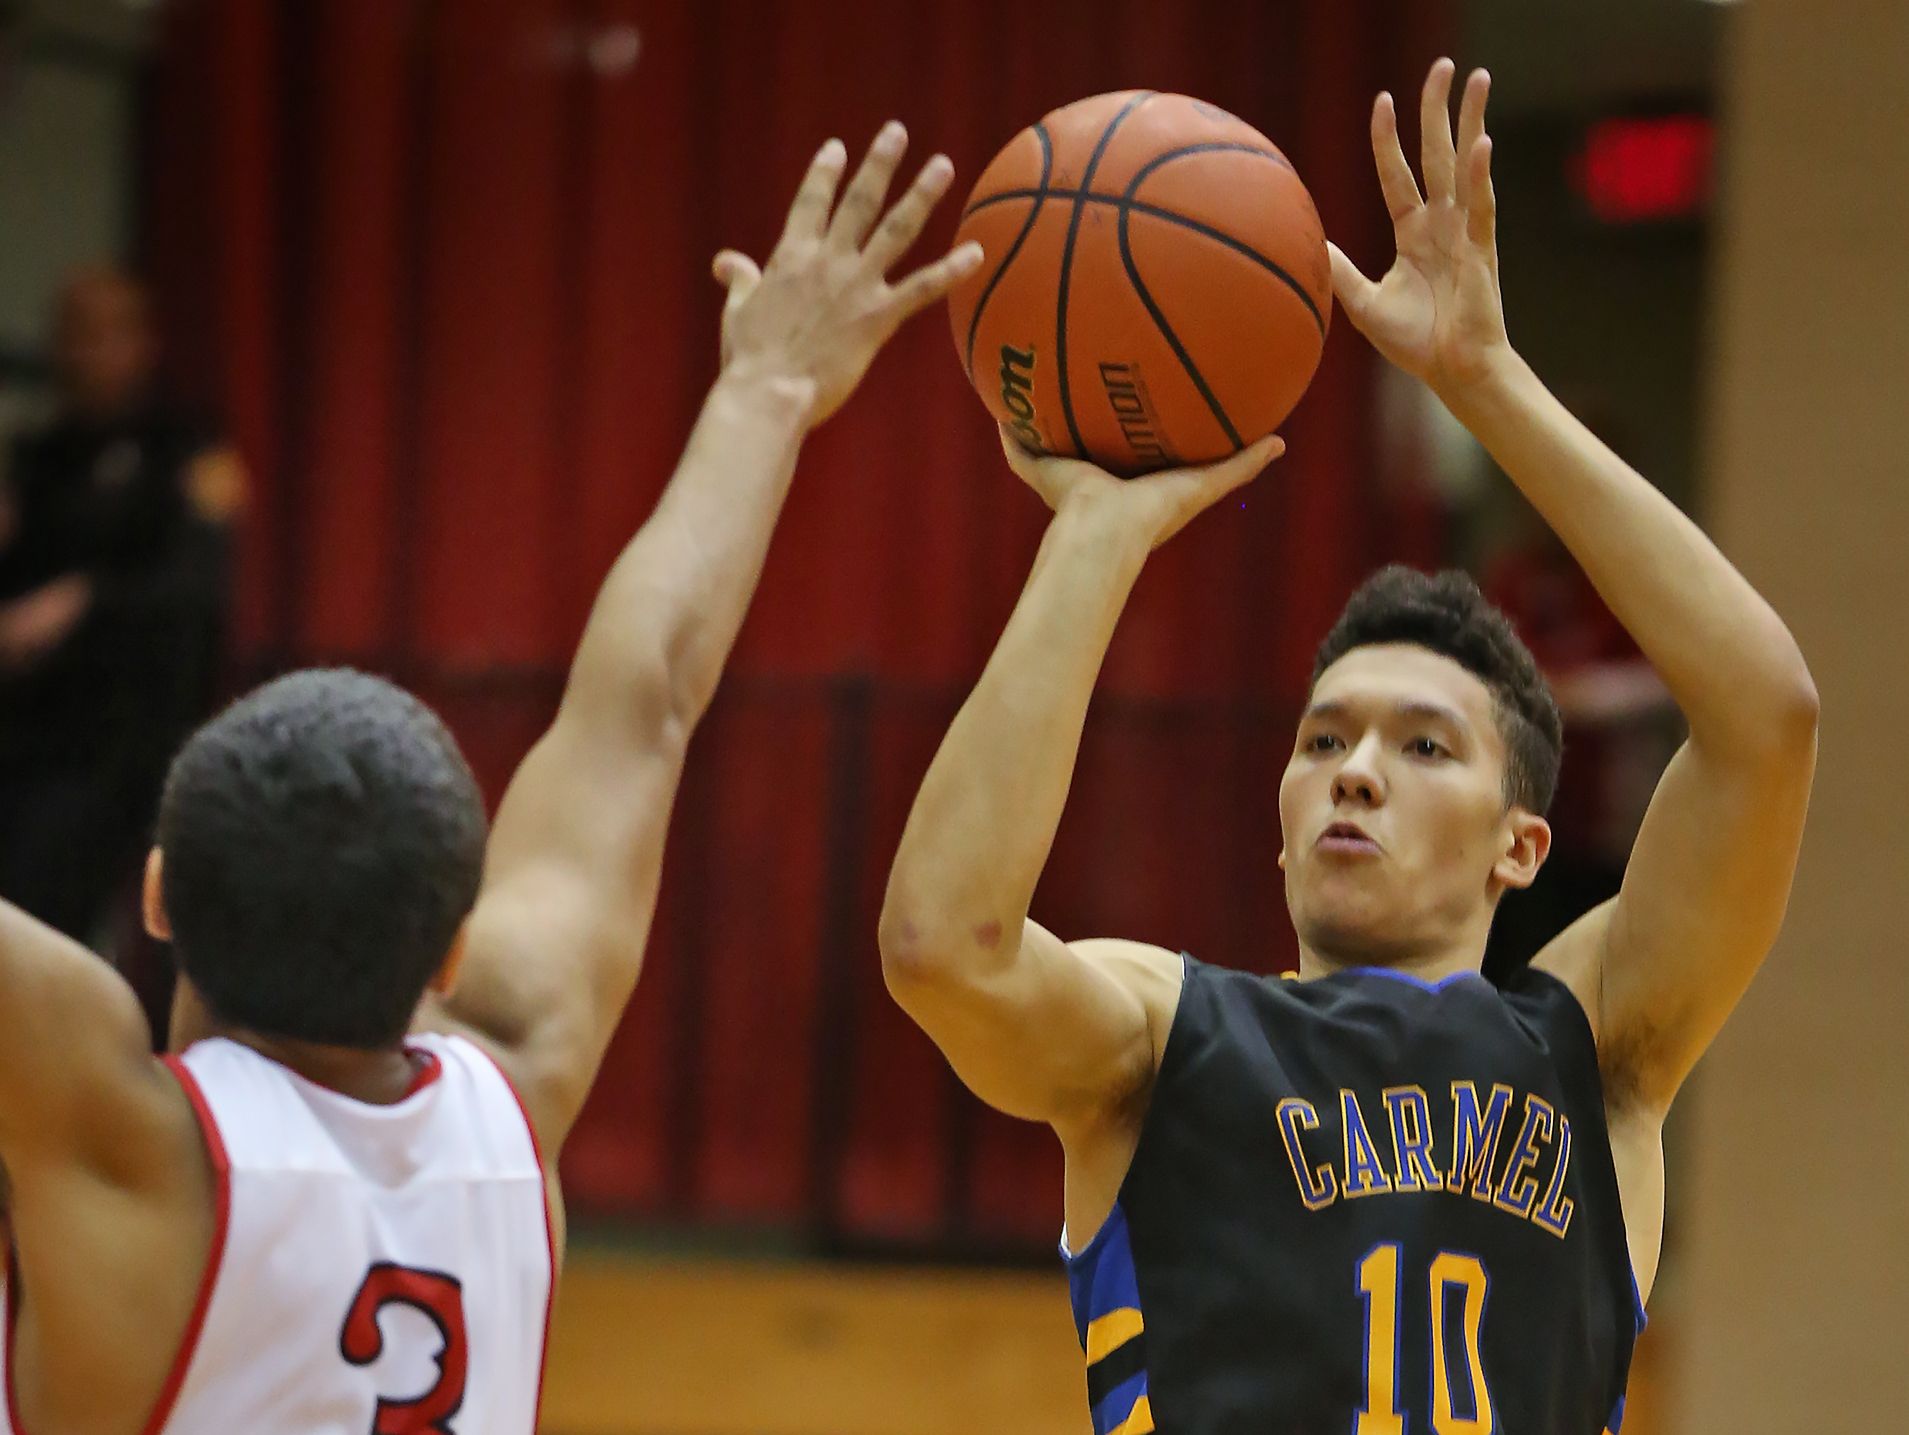 Carmel's Sterling Brown led the Greyhounds with 24 points during their win Friday night against Pike.